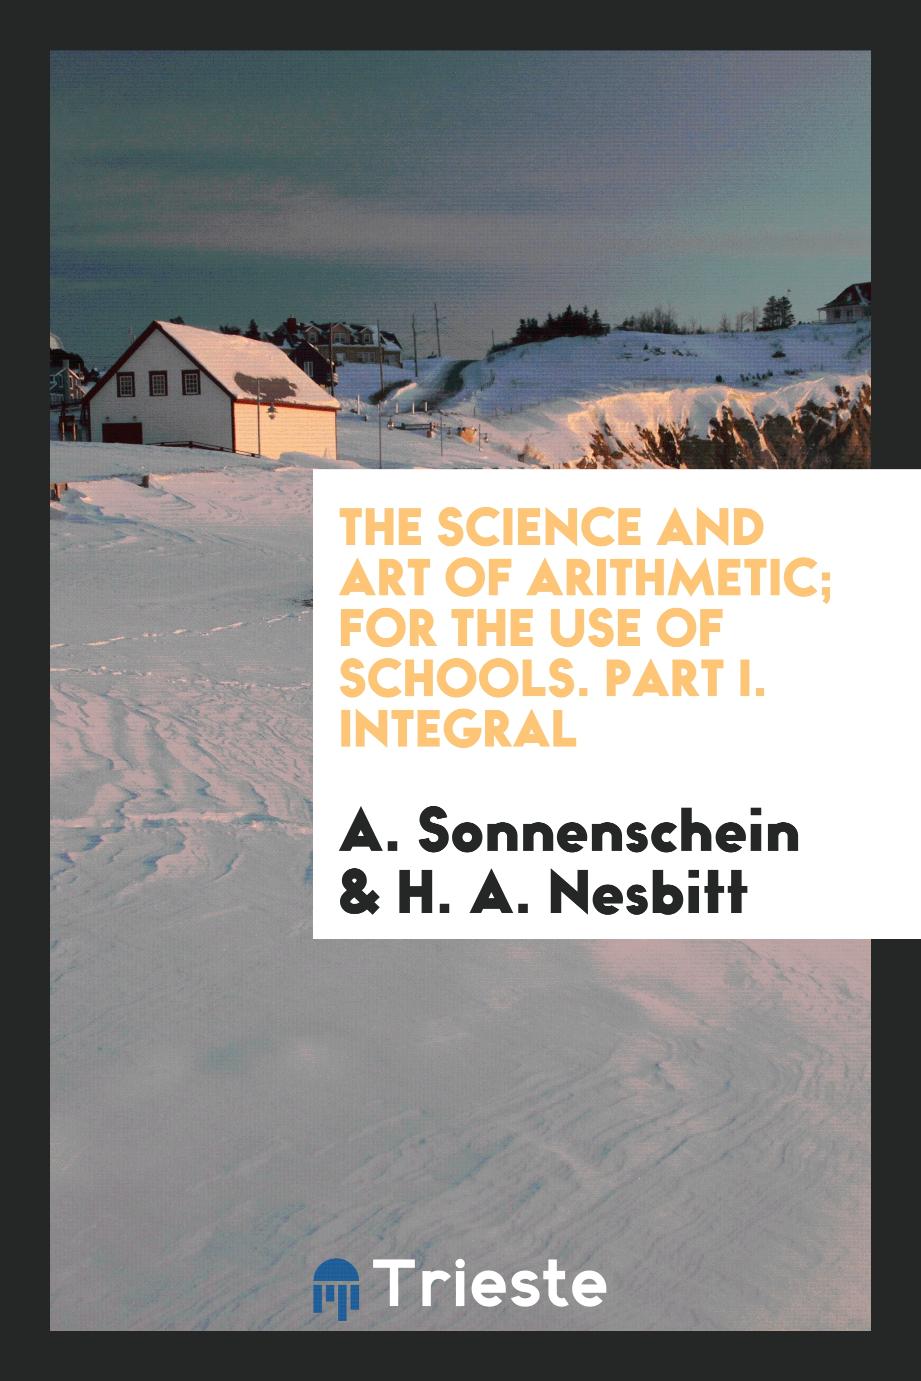 The science and art of arithmetic; for the Use of Schools. Part I. Integral